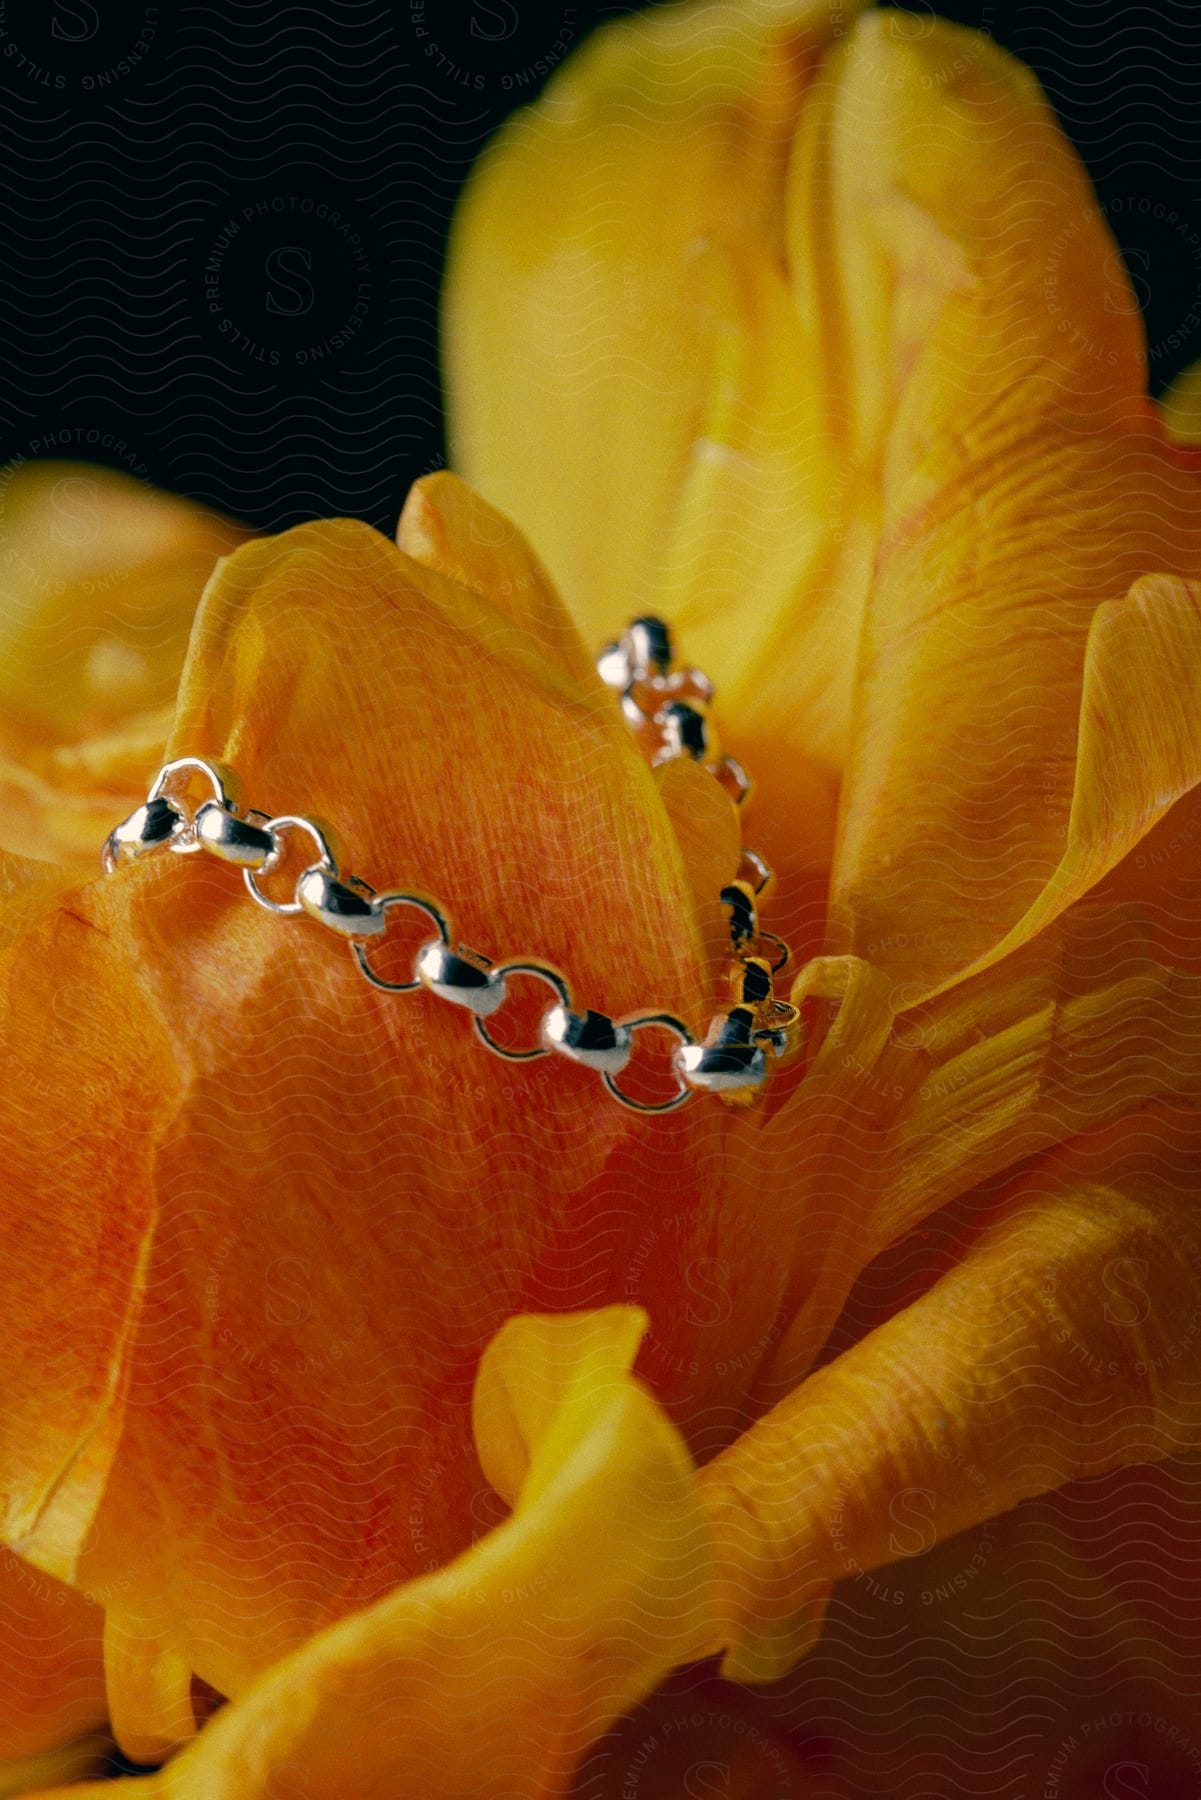 Silver bracelet on a yellow petal flower on a black blurred background.